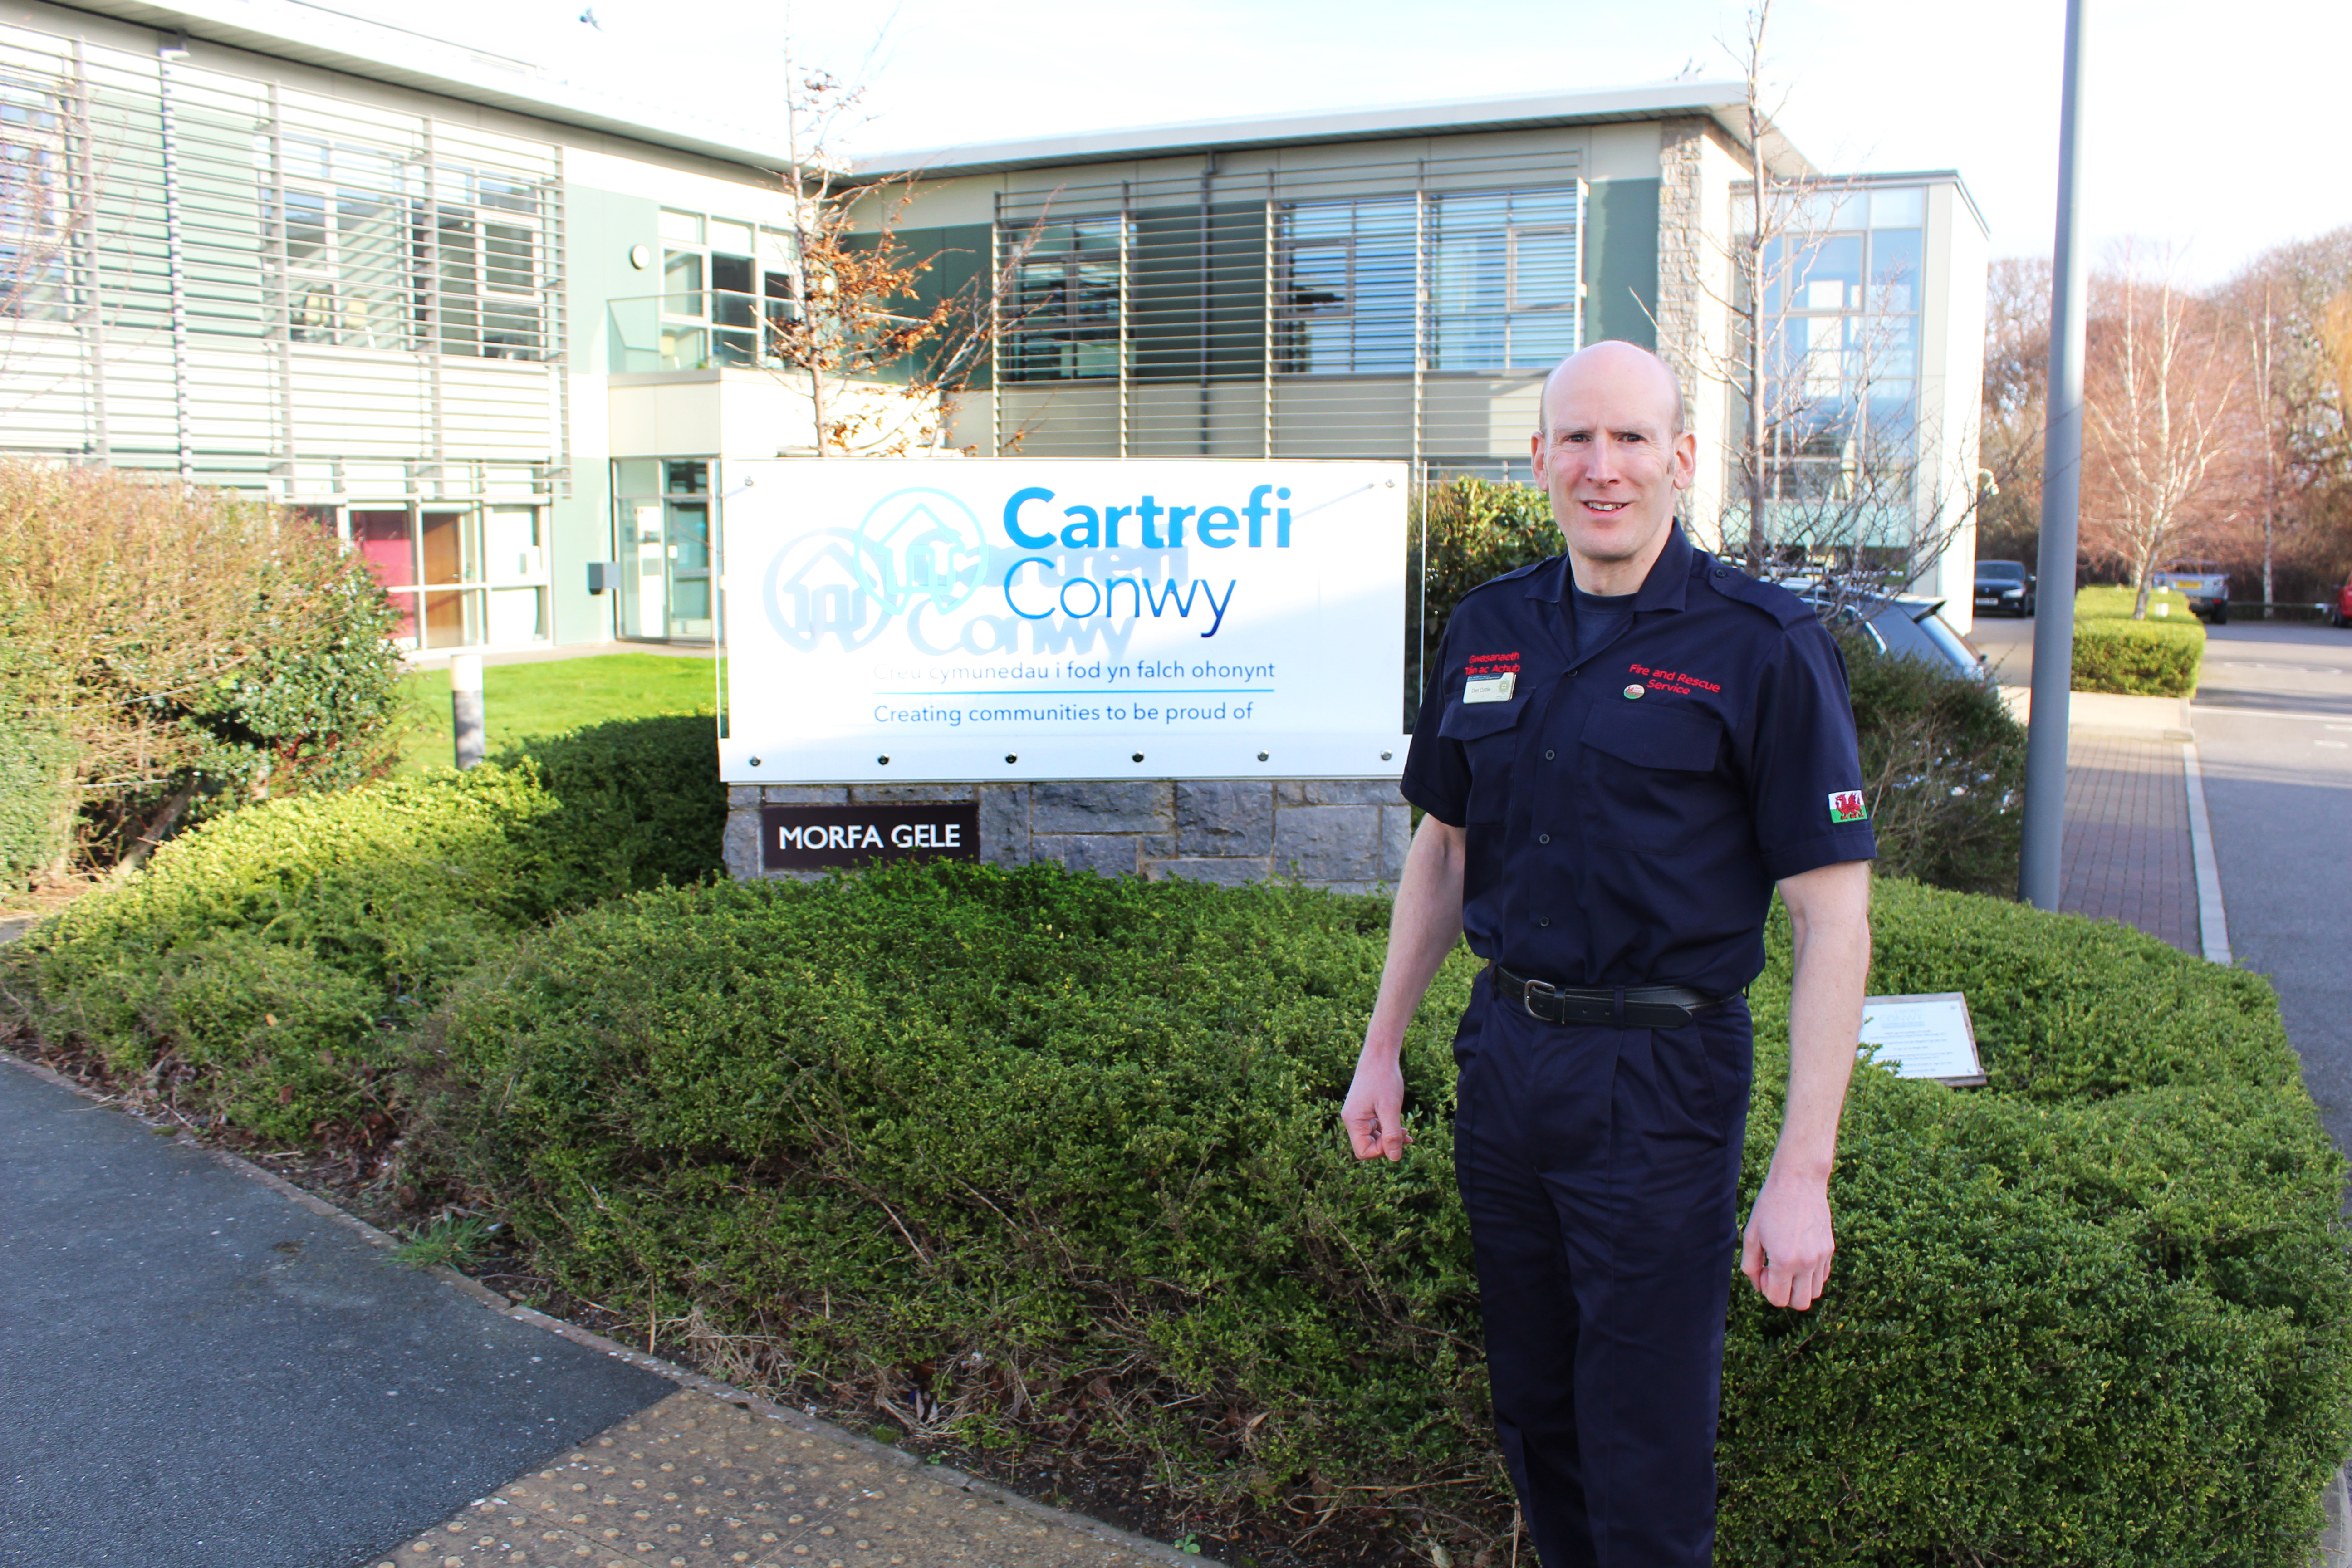 Deri appointed as part of Cartrefi Conwy and North Wales Fire and Rescue Service partnership